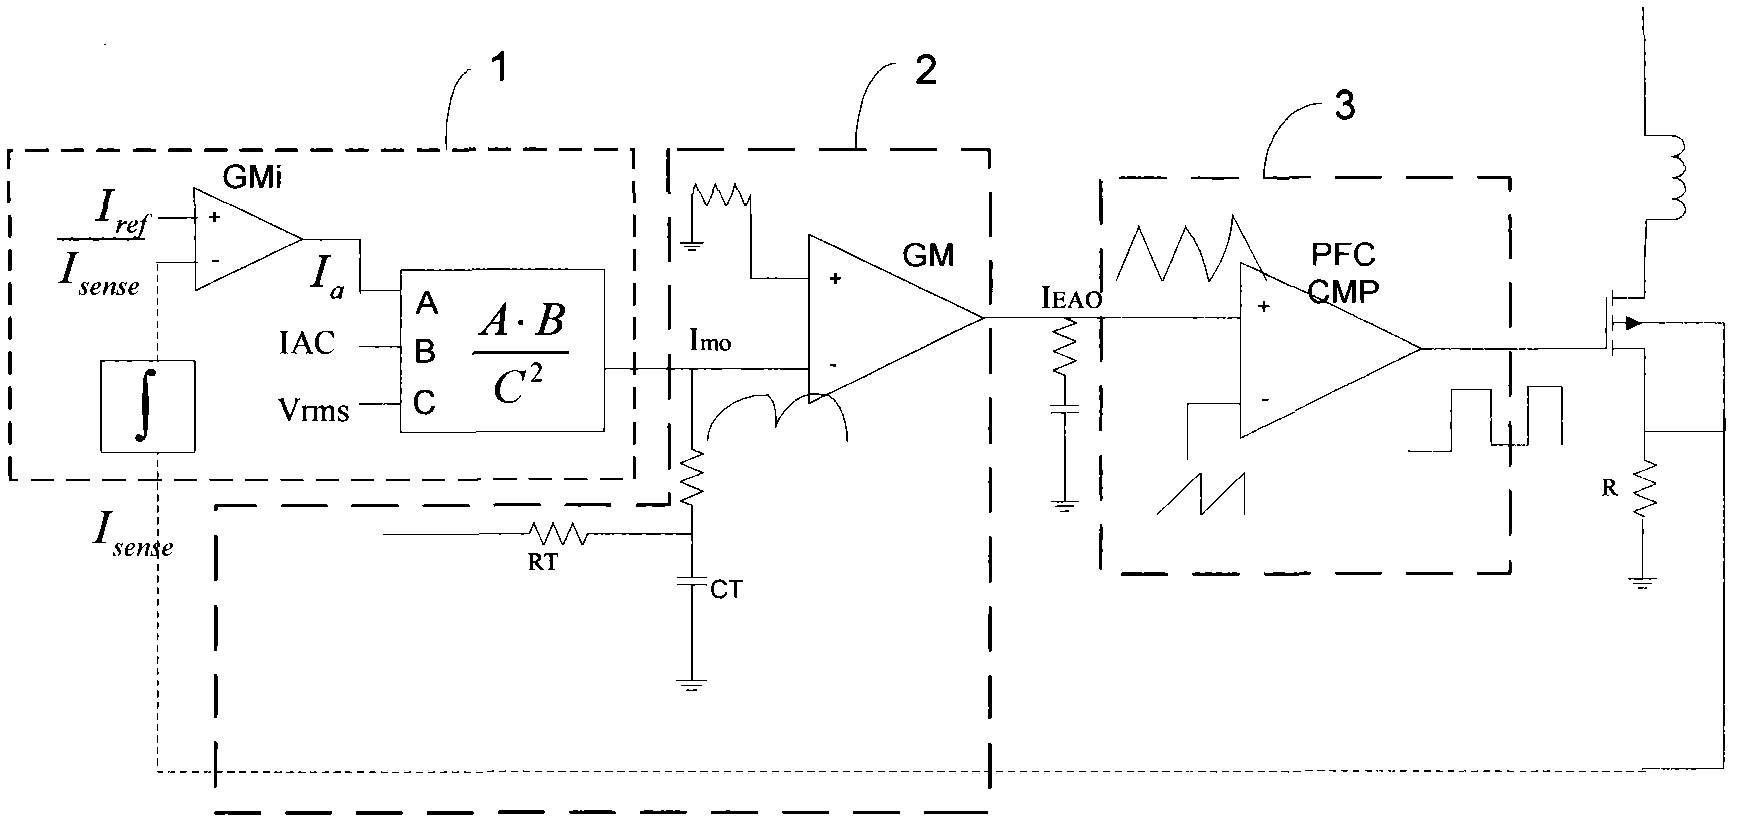 Power factor correction circuit for reducing harmonic distortion of LED (light-emitting diode) drive circuit